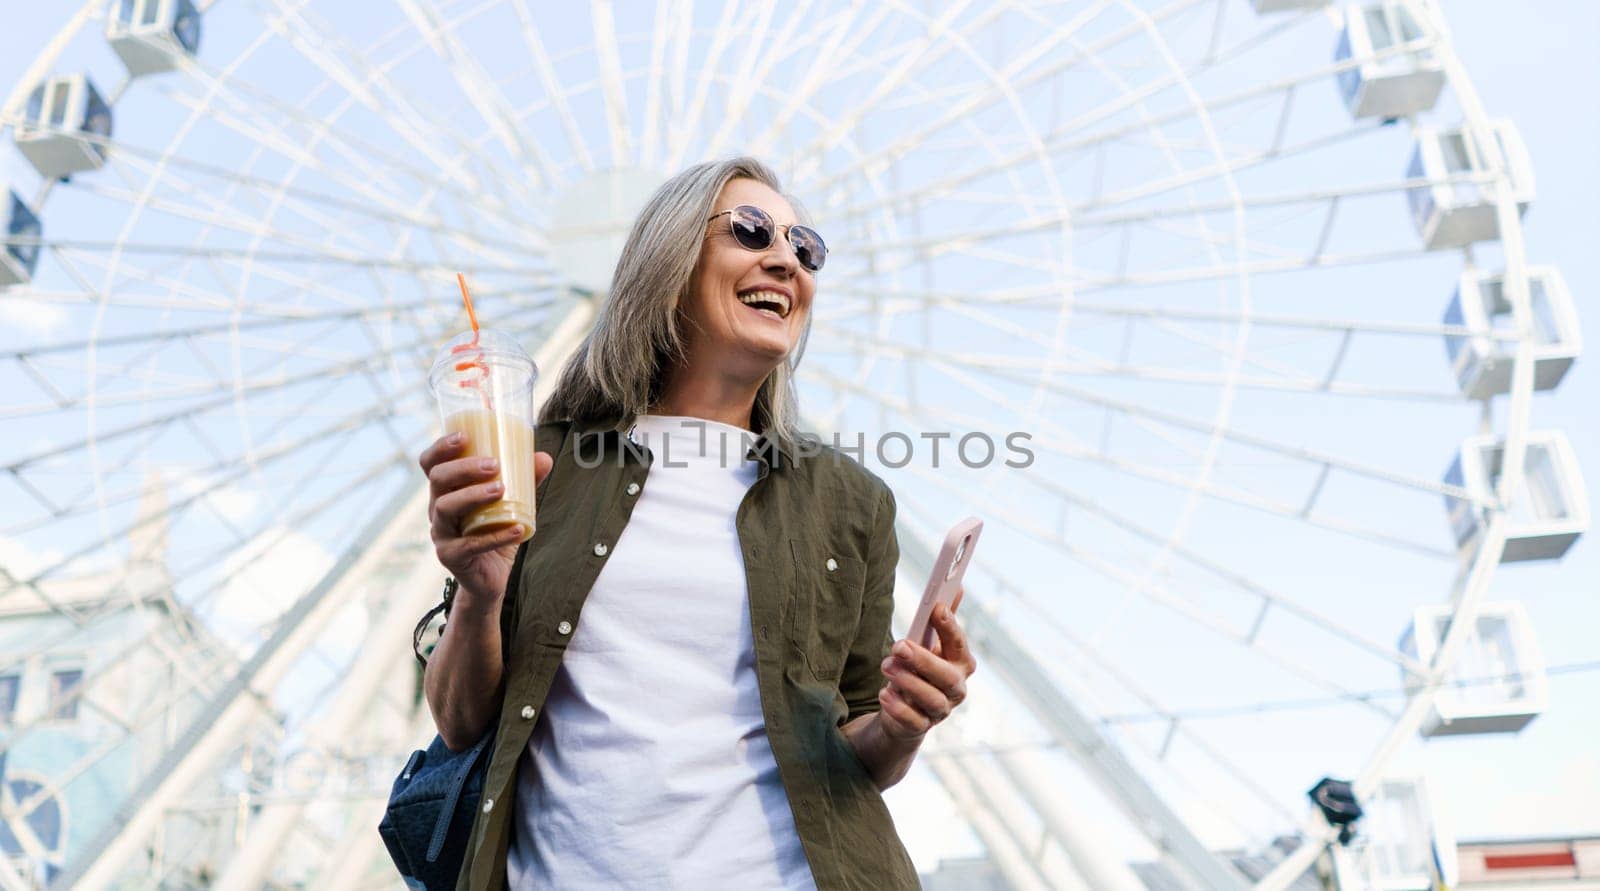 Cheerful senior woman enjoys a sunny day in an old European city, holding her phone and a cup of juice in her hands with a big smile on her face, embodying the concept of elderly happiness. High quality photo